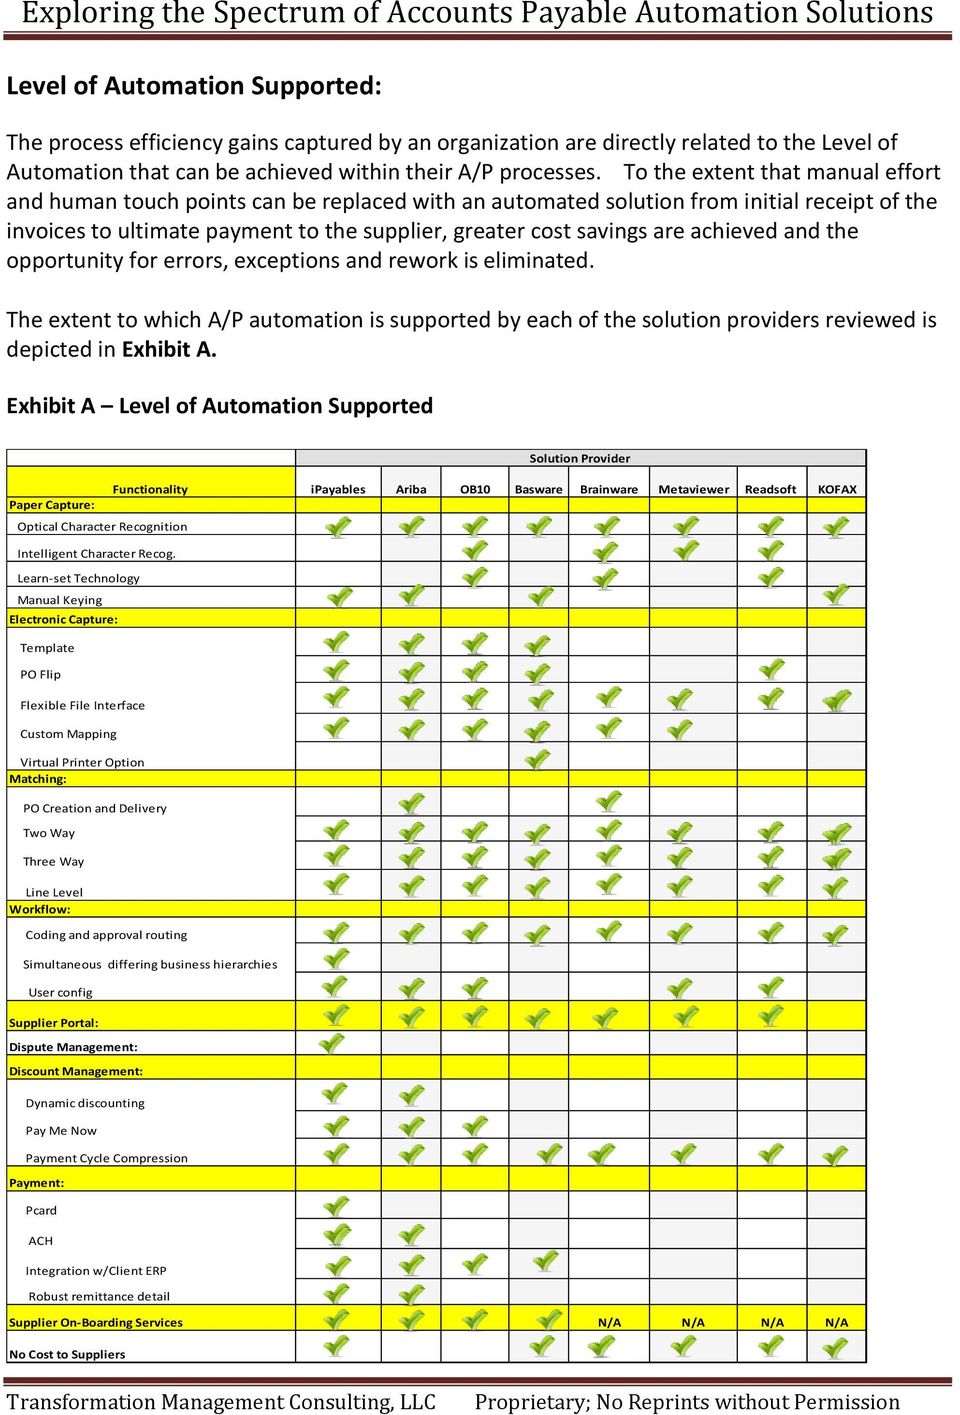 achieved and the opportunity for errors, exceptions and rework is eliminated. The extent to which A/P automation is supported by each of the solution providers reviewed is depicted in Exhibit A.